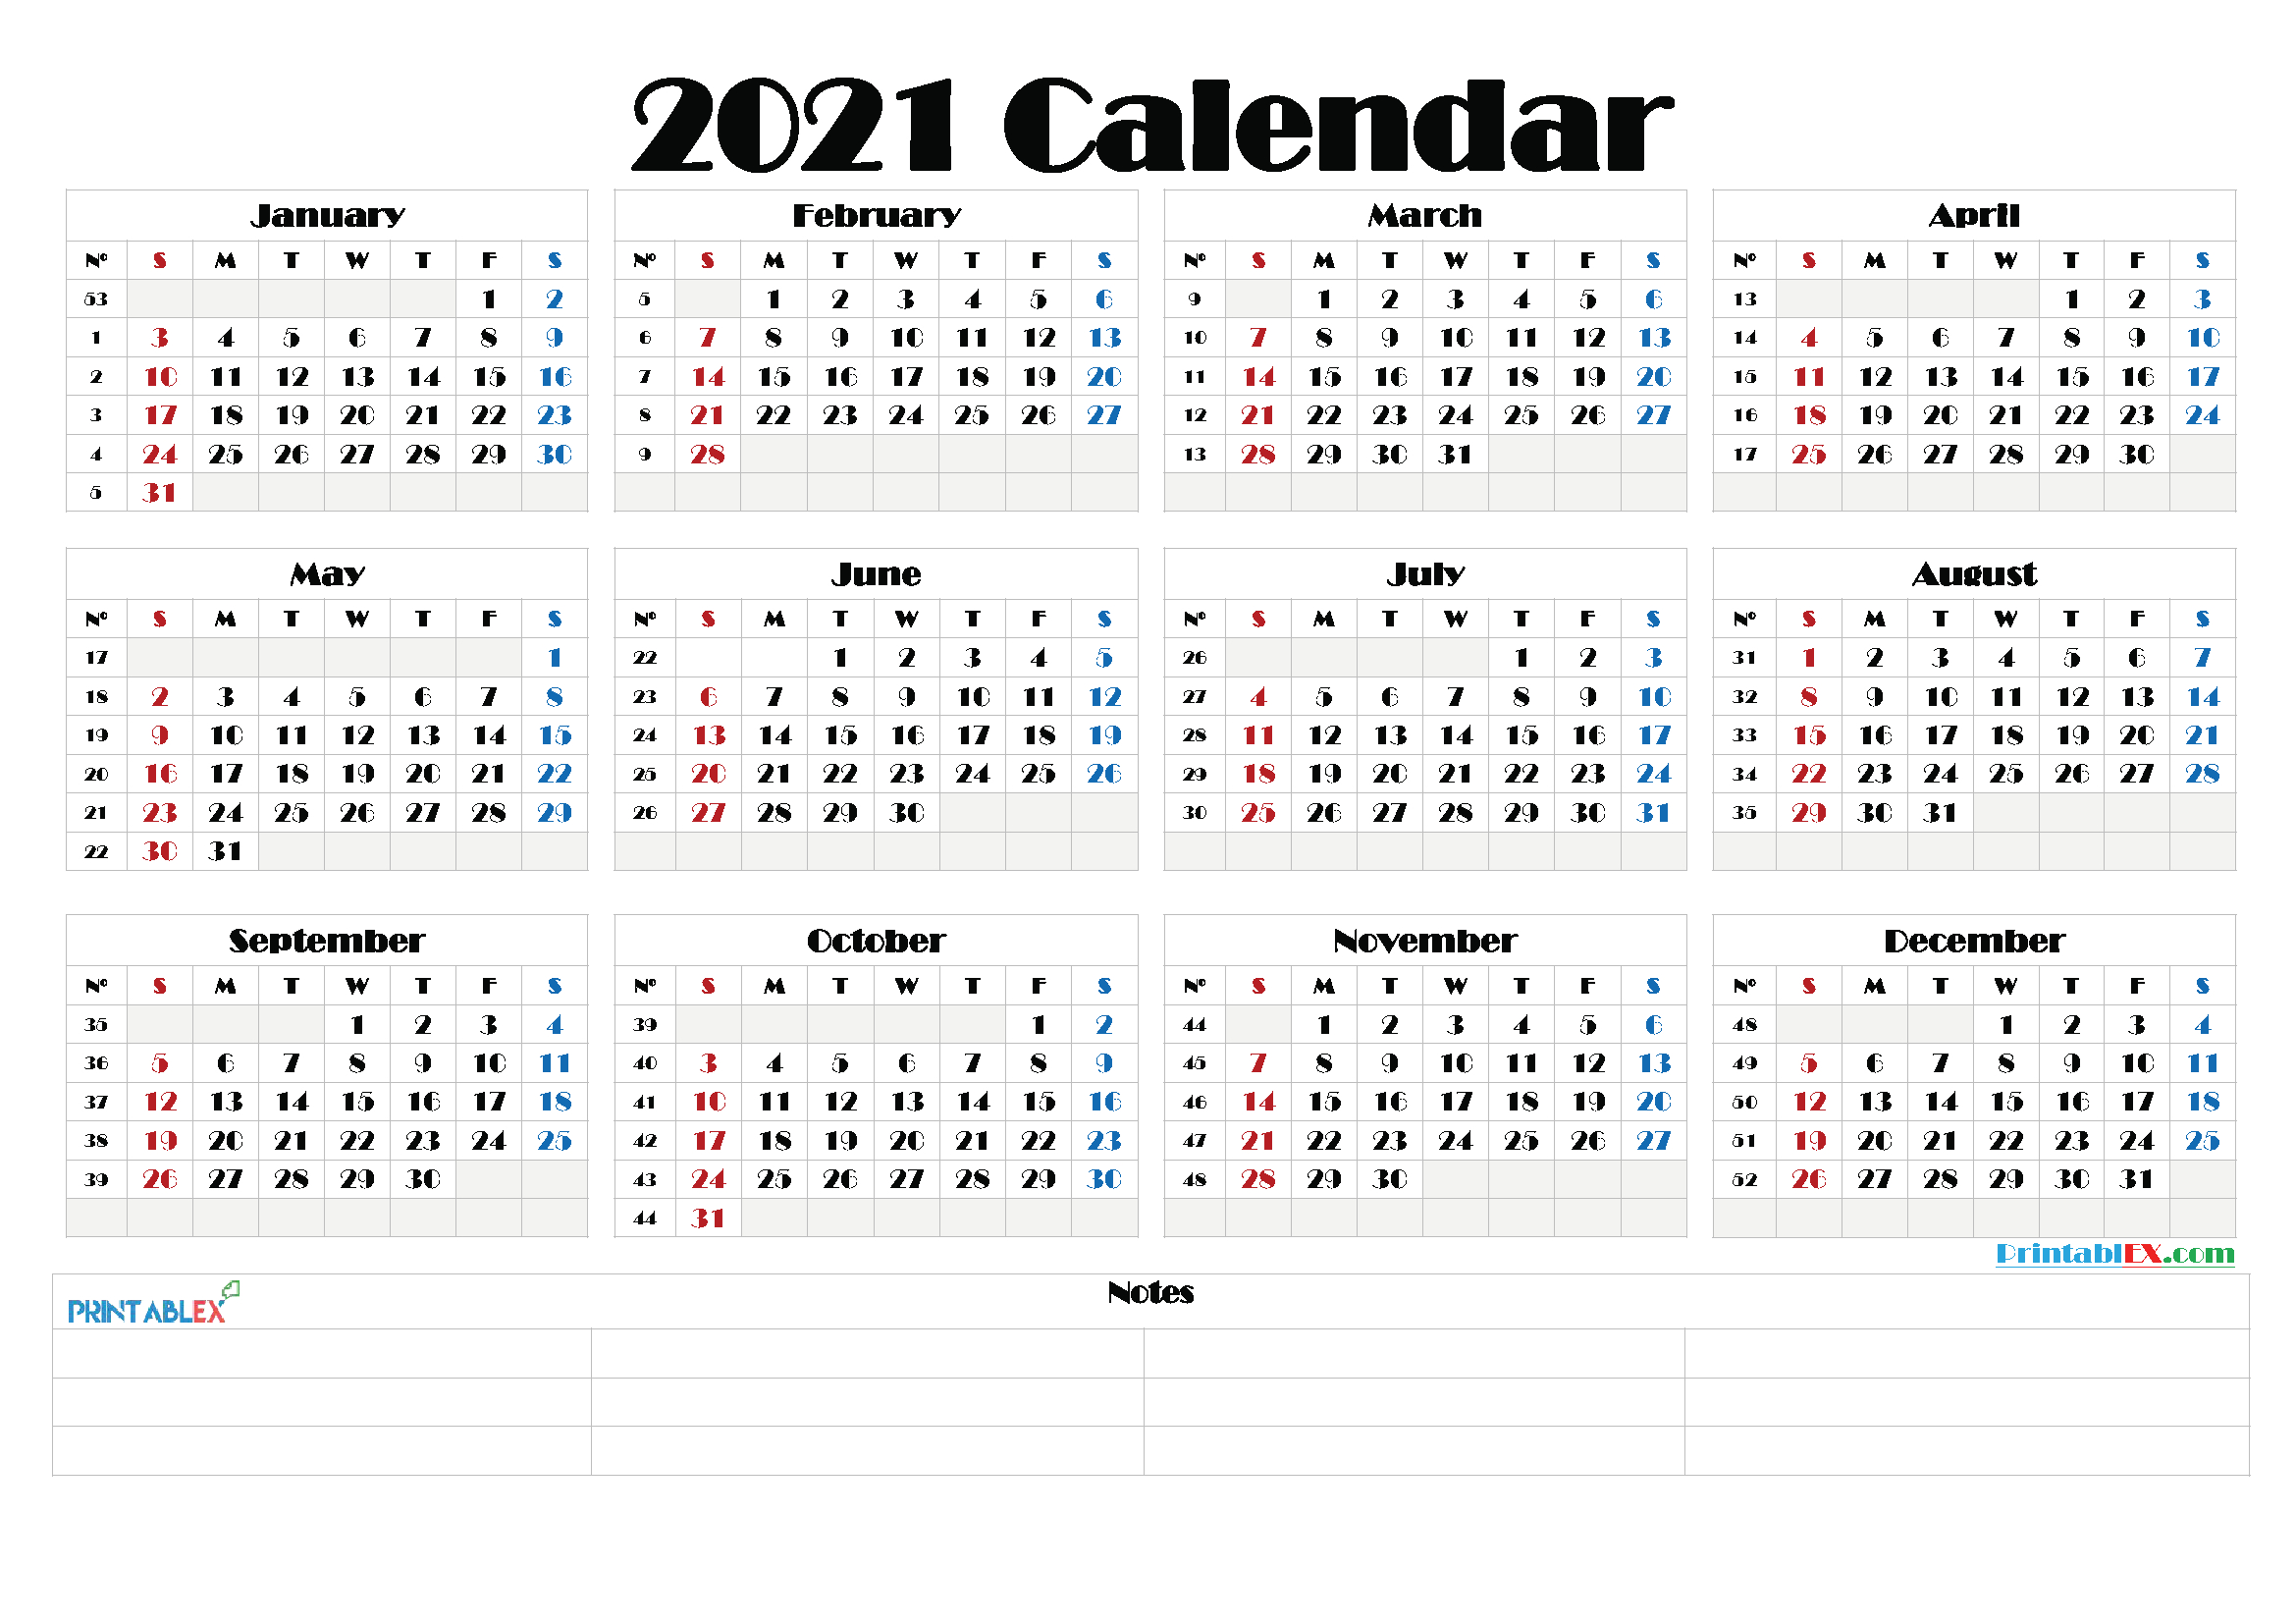 Free 2021 Yearly Calender Template - 2021 Printable Yearly